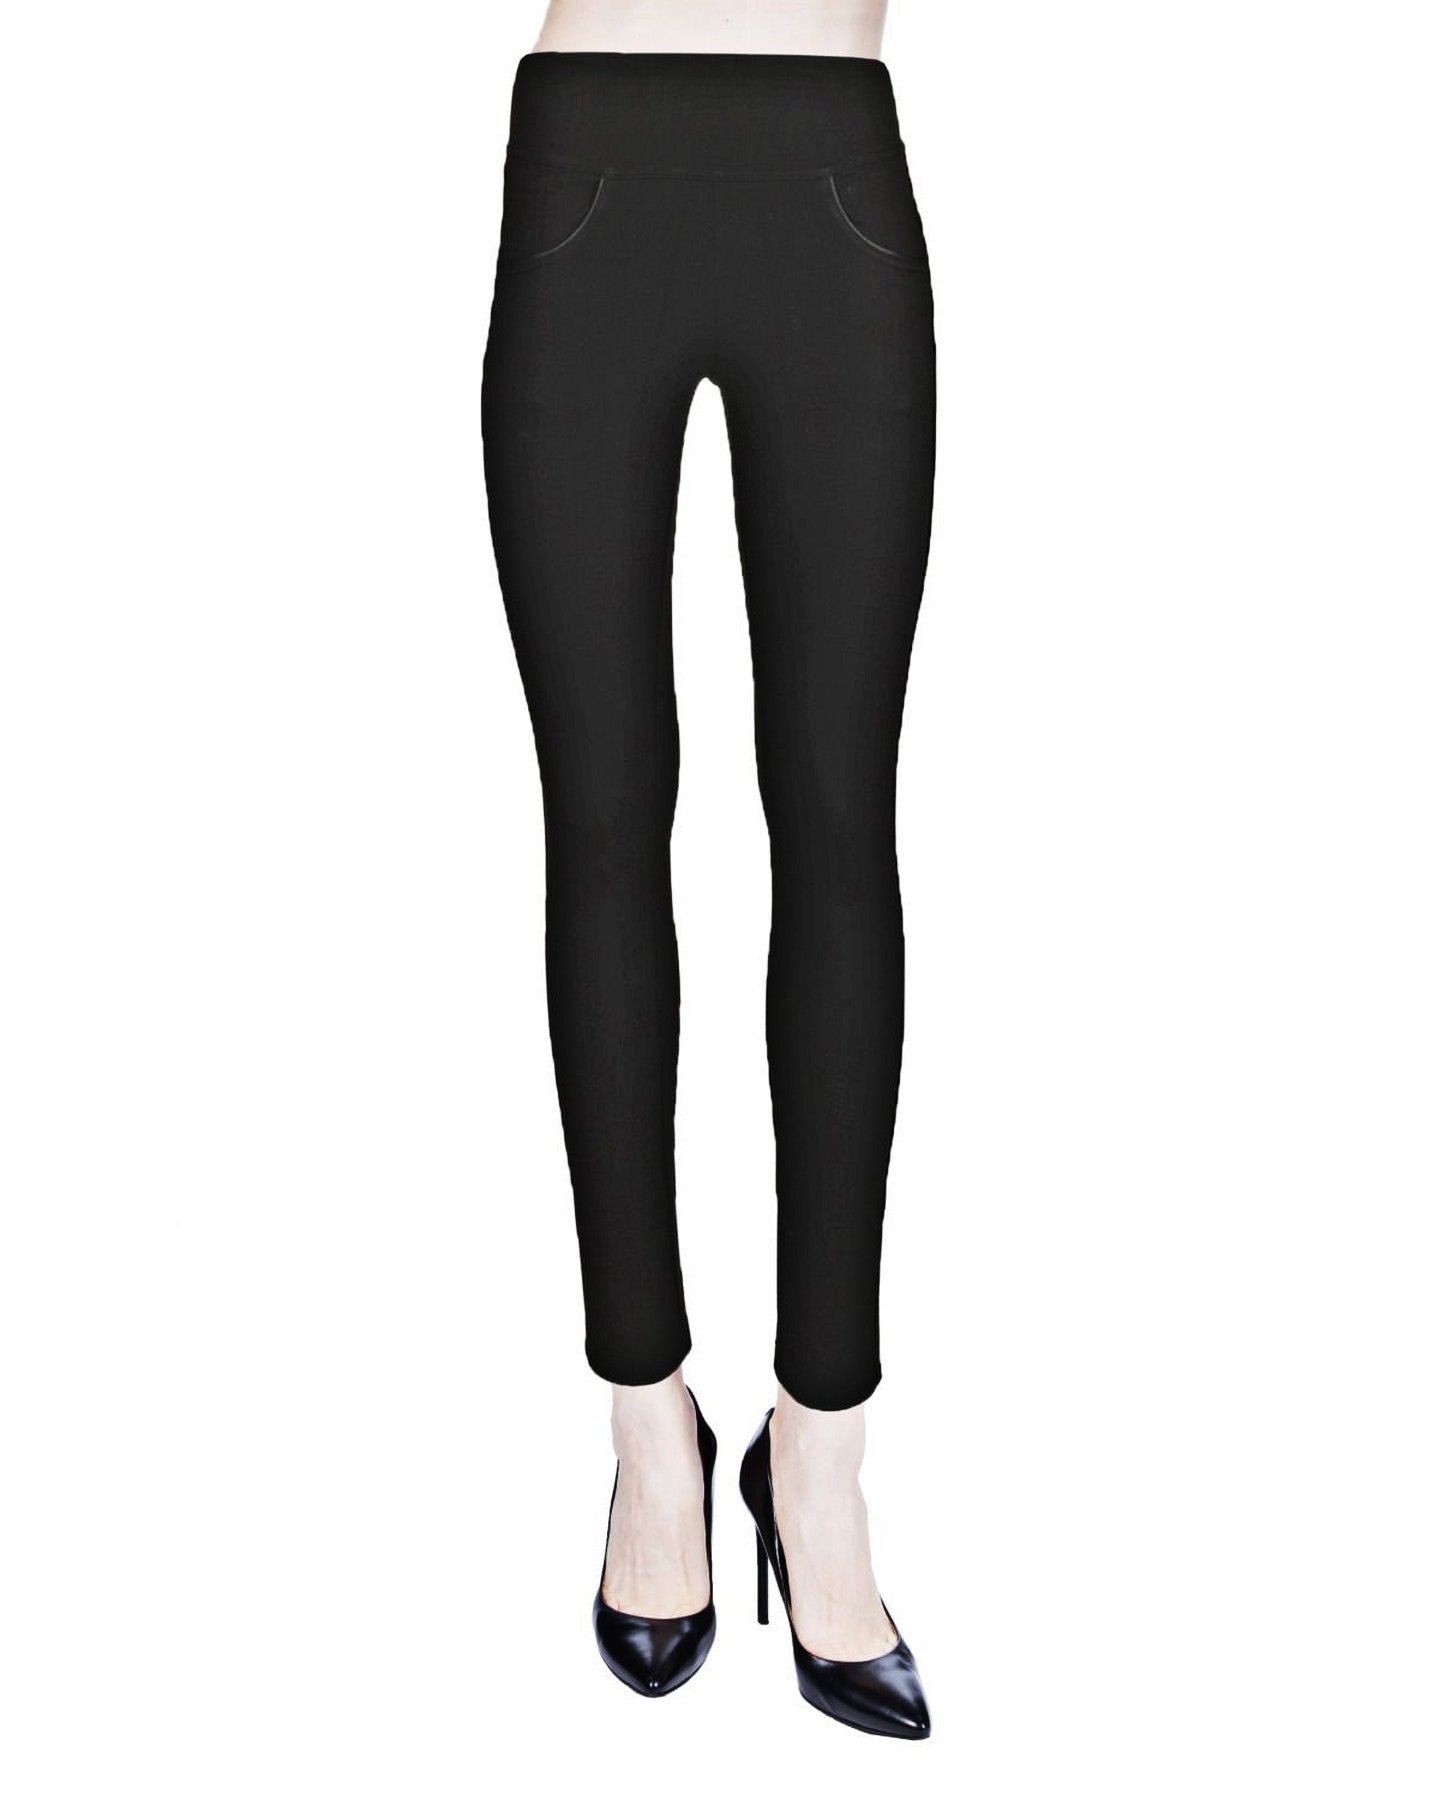 neezeelee Women's Comfort Black high Waisted Leggings Dress Pants Stretch  Slim Fit Trousers Casual Work with Pockets (Black, 4) at  Women's  Clothing store